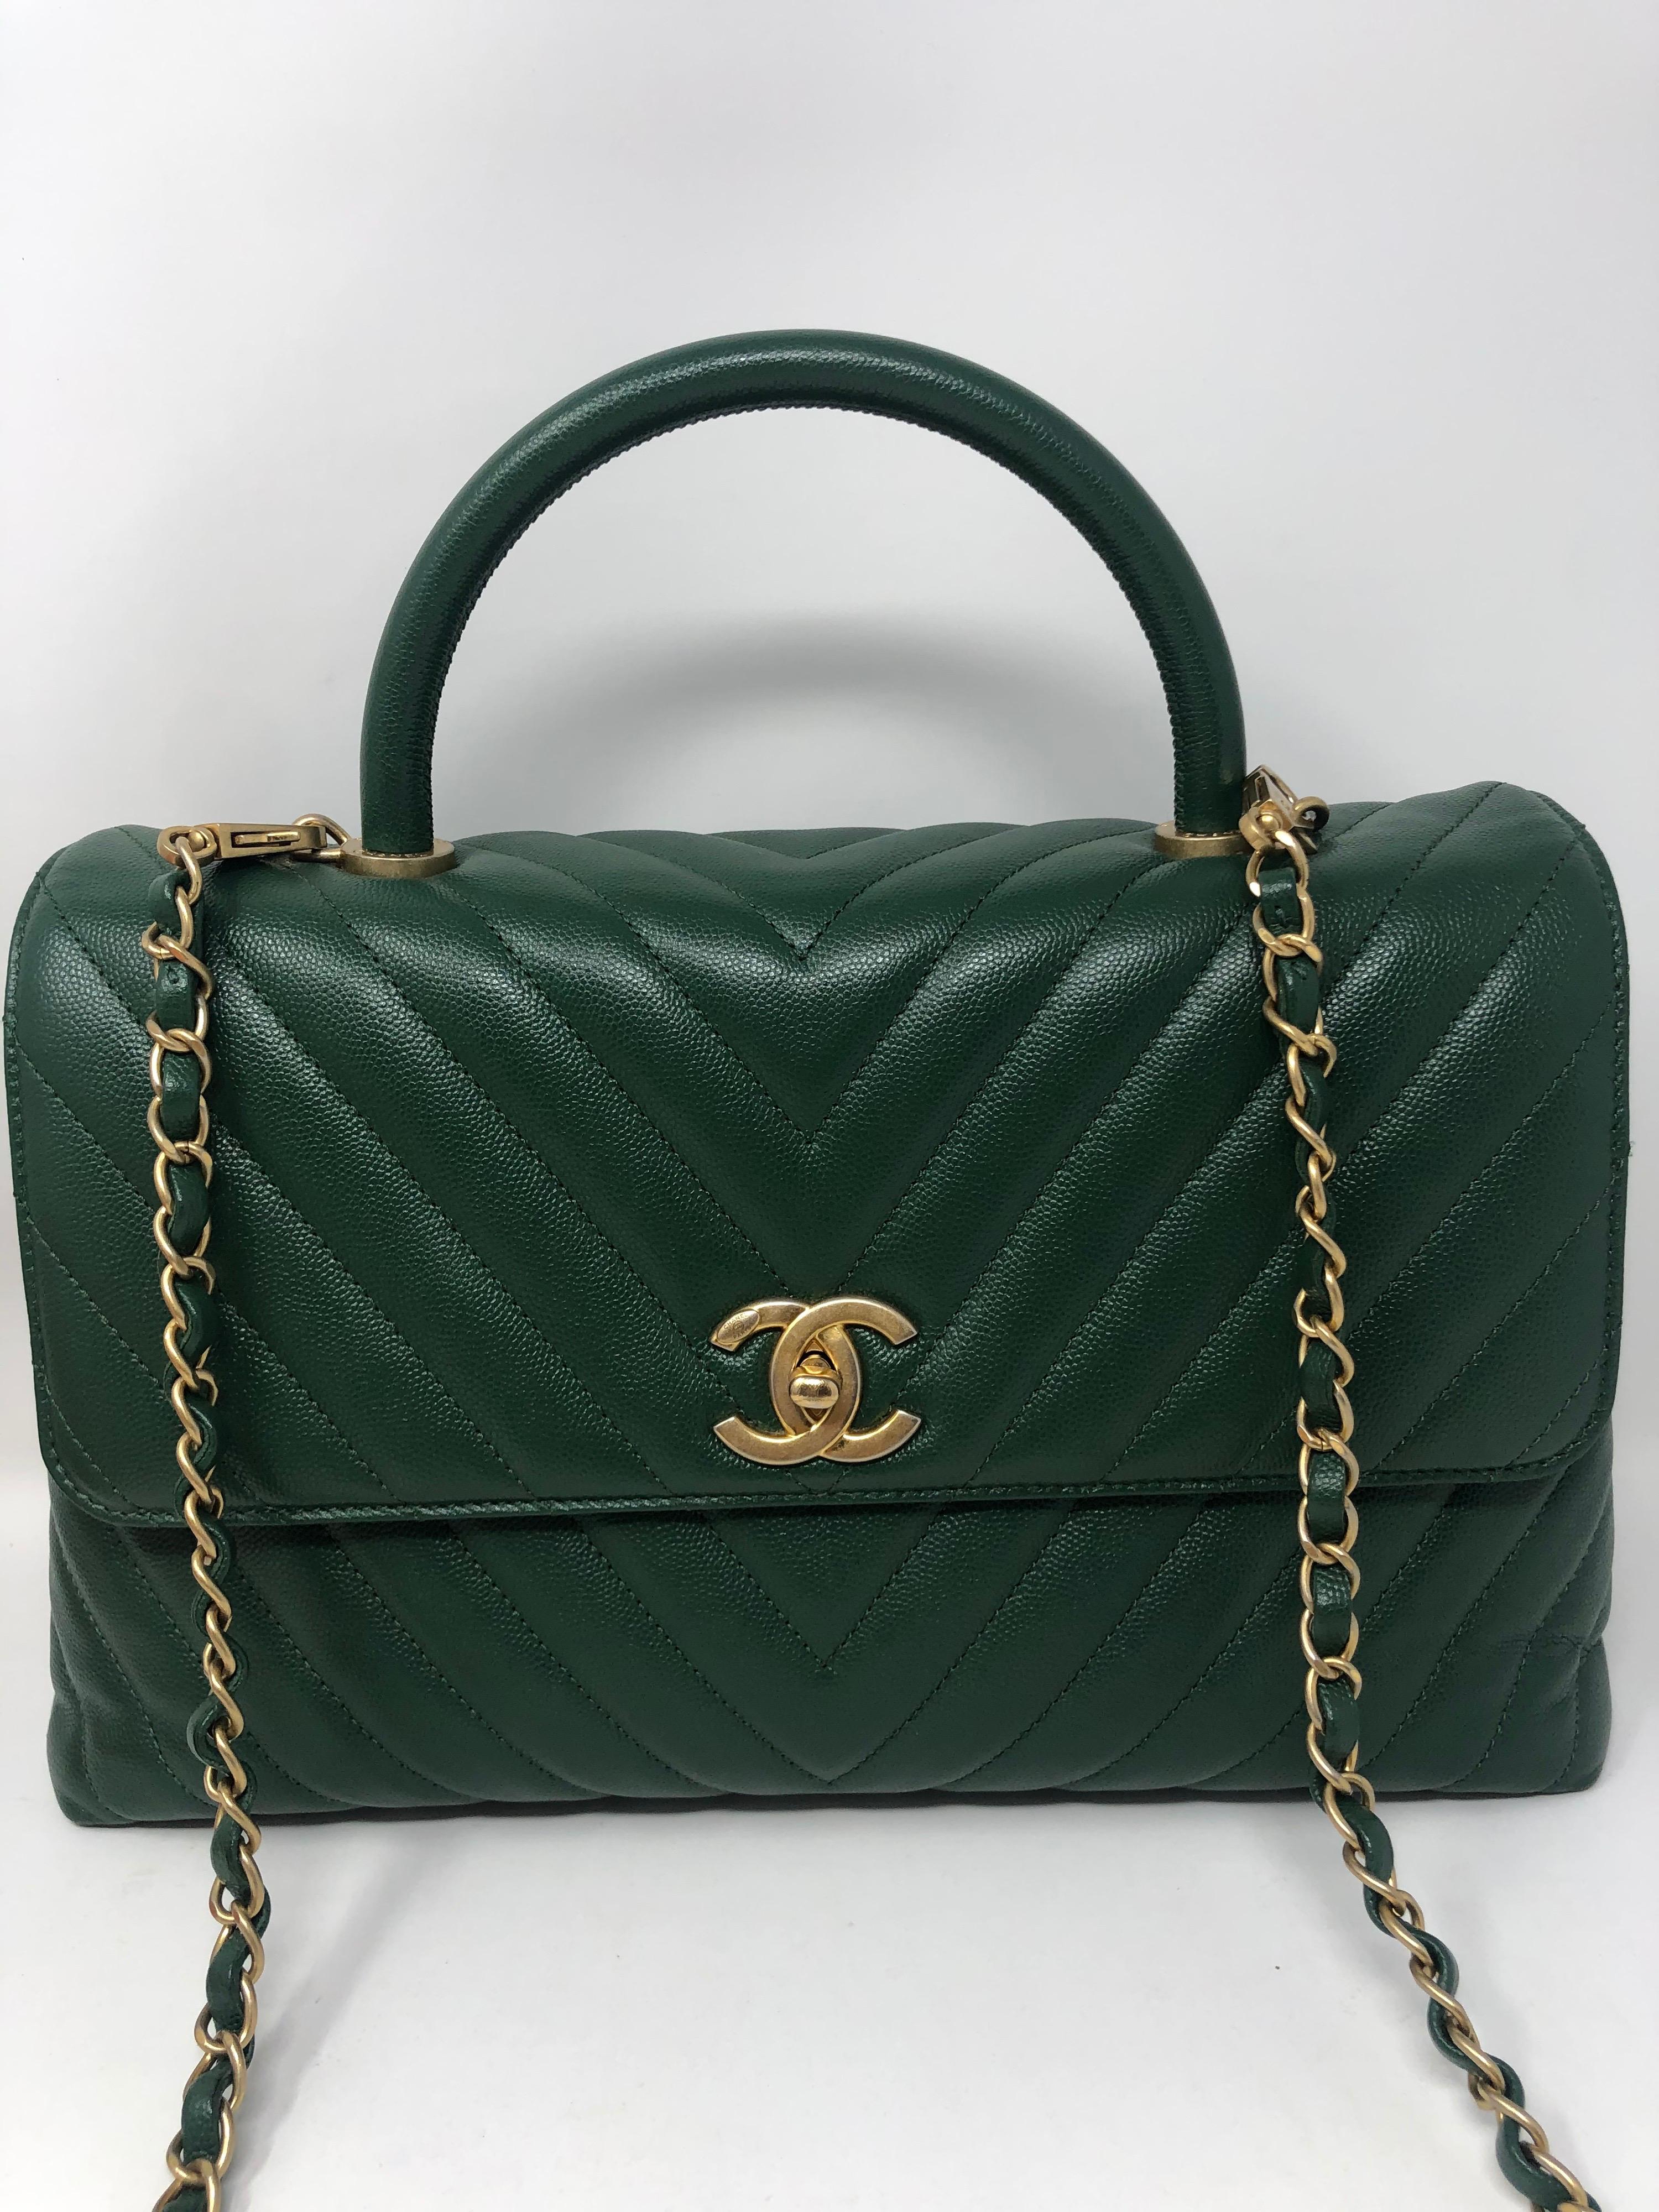 Chanel Green Chevron Coco Handle Bag. Gold hardware. Large size Coco Handle. Rare color and limited. Excellent condition like new. Can be worn 2 ways. Includes original tag and authenticity card. Don't miss out. Guaranteed authentic. 